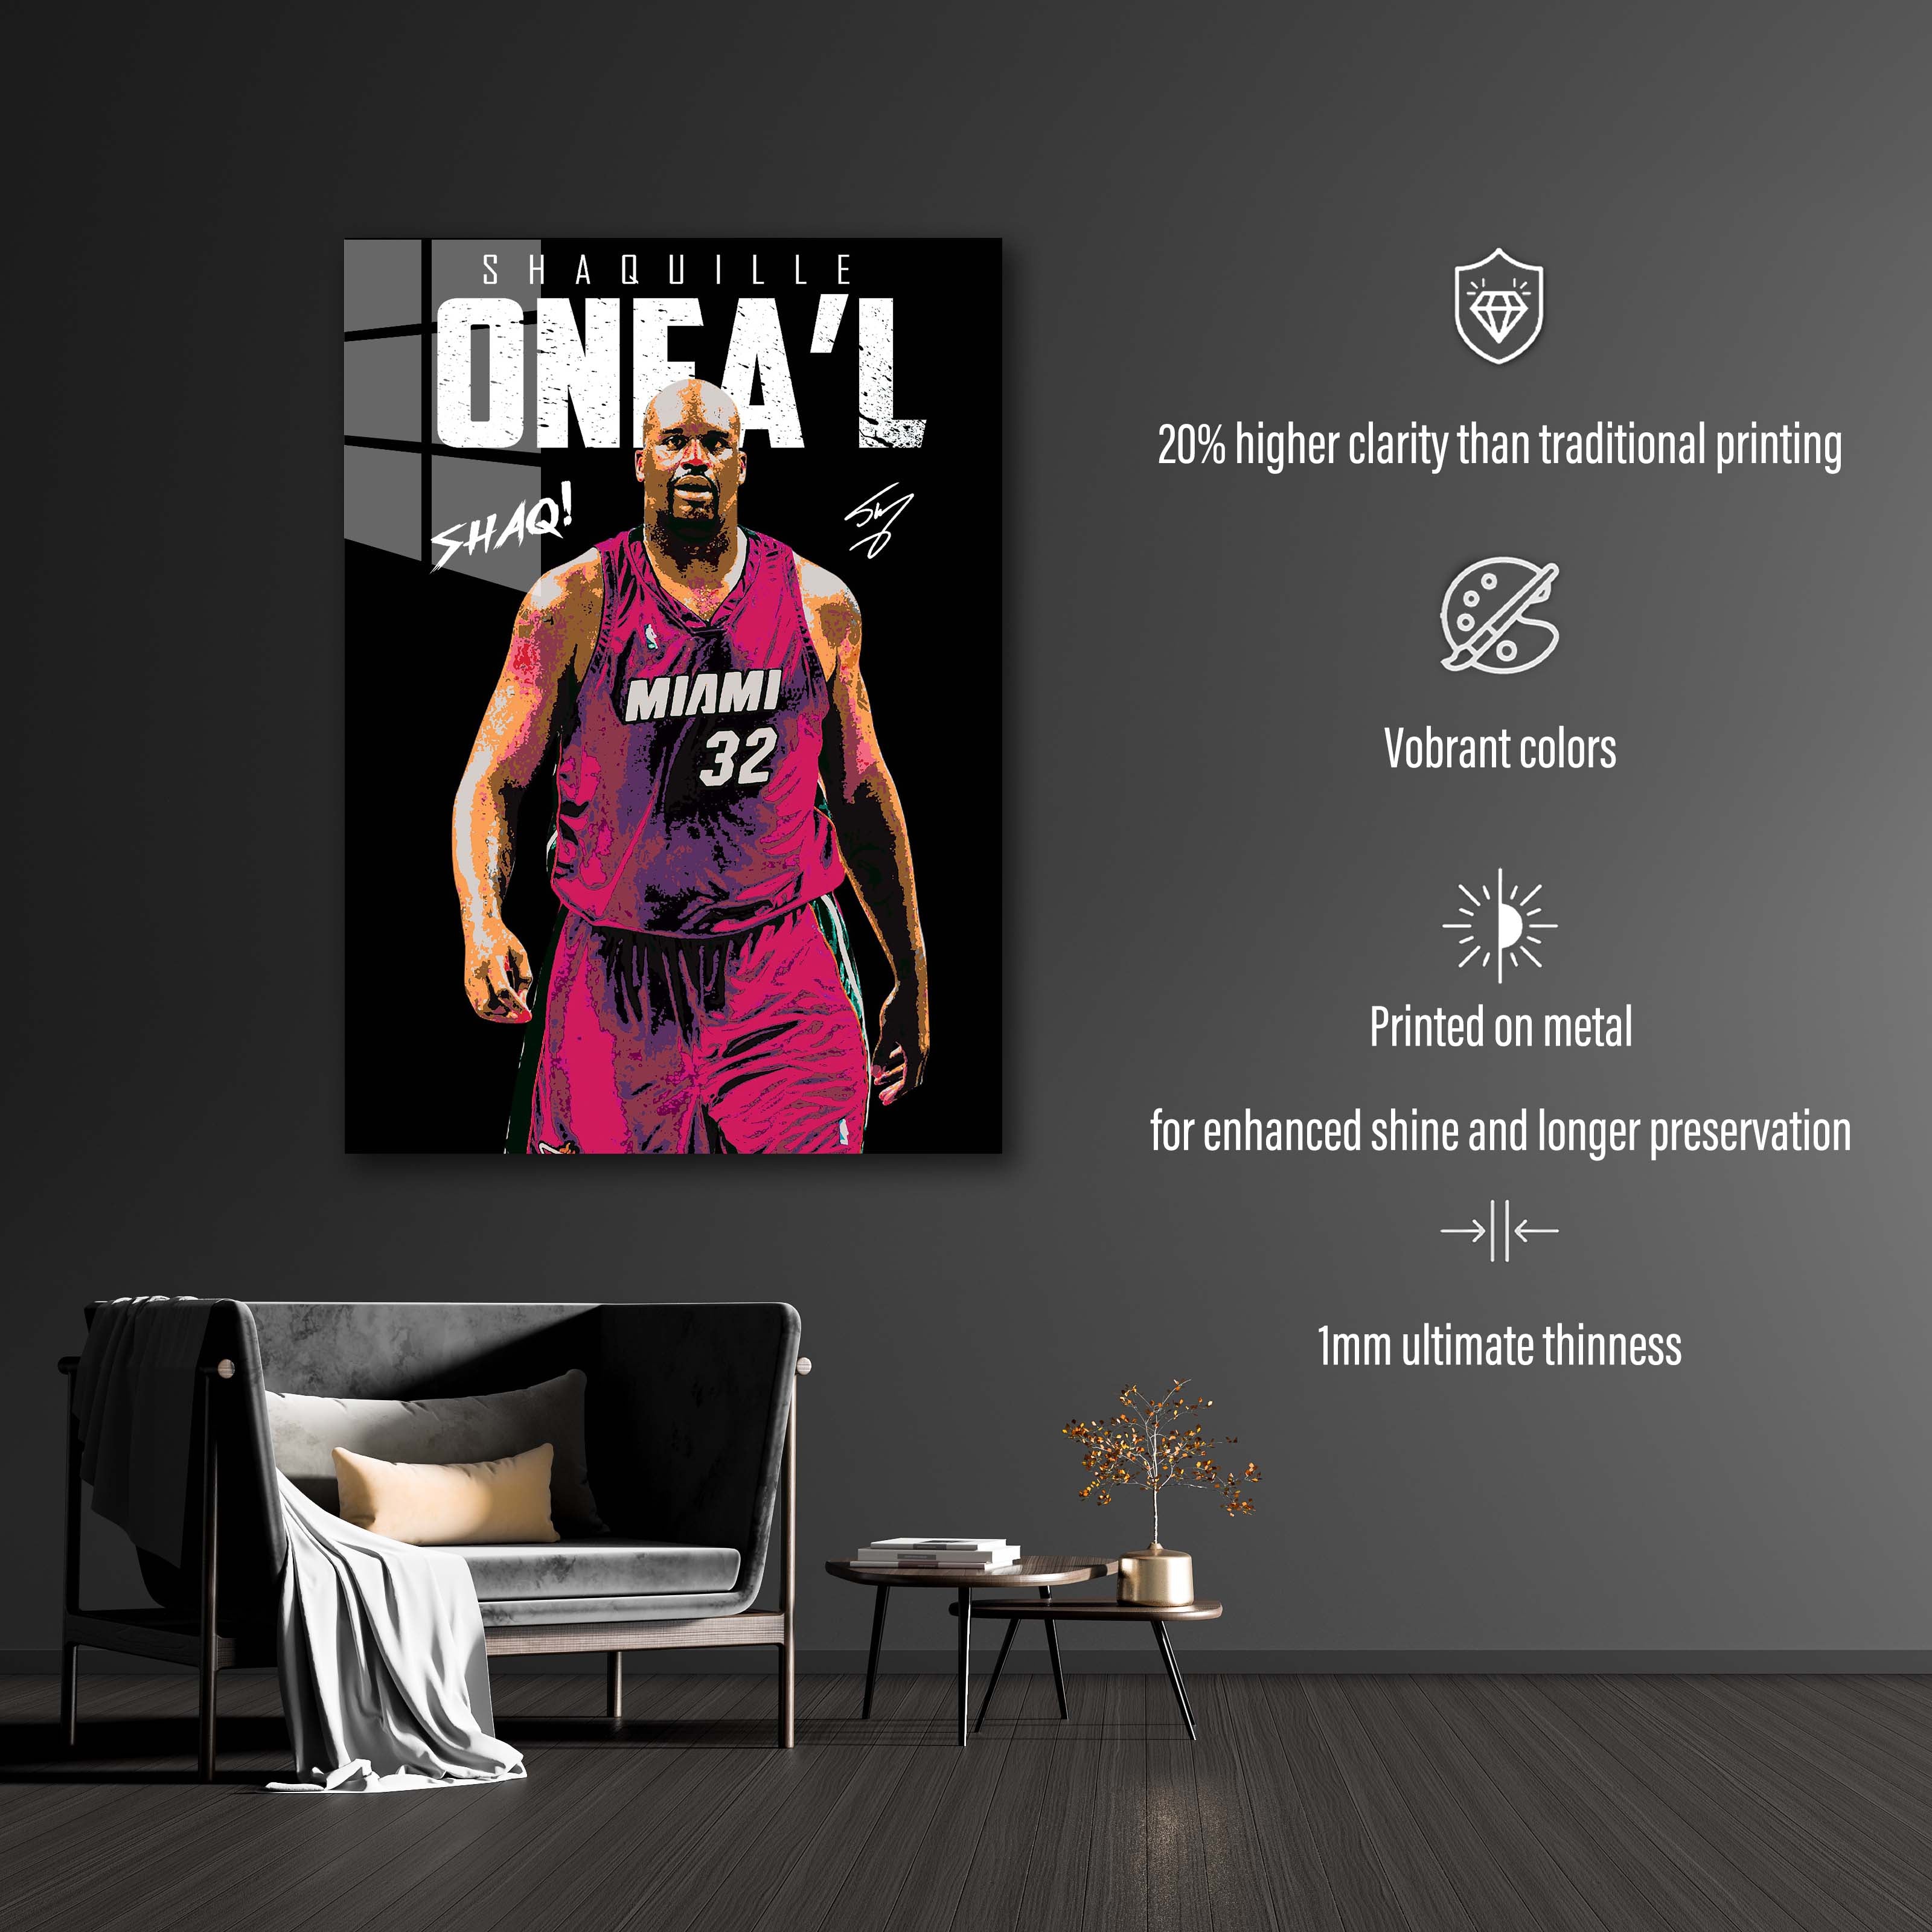 Shaquille O'neal v1-designed by @My Kido Art